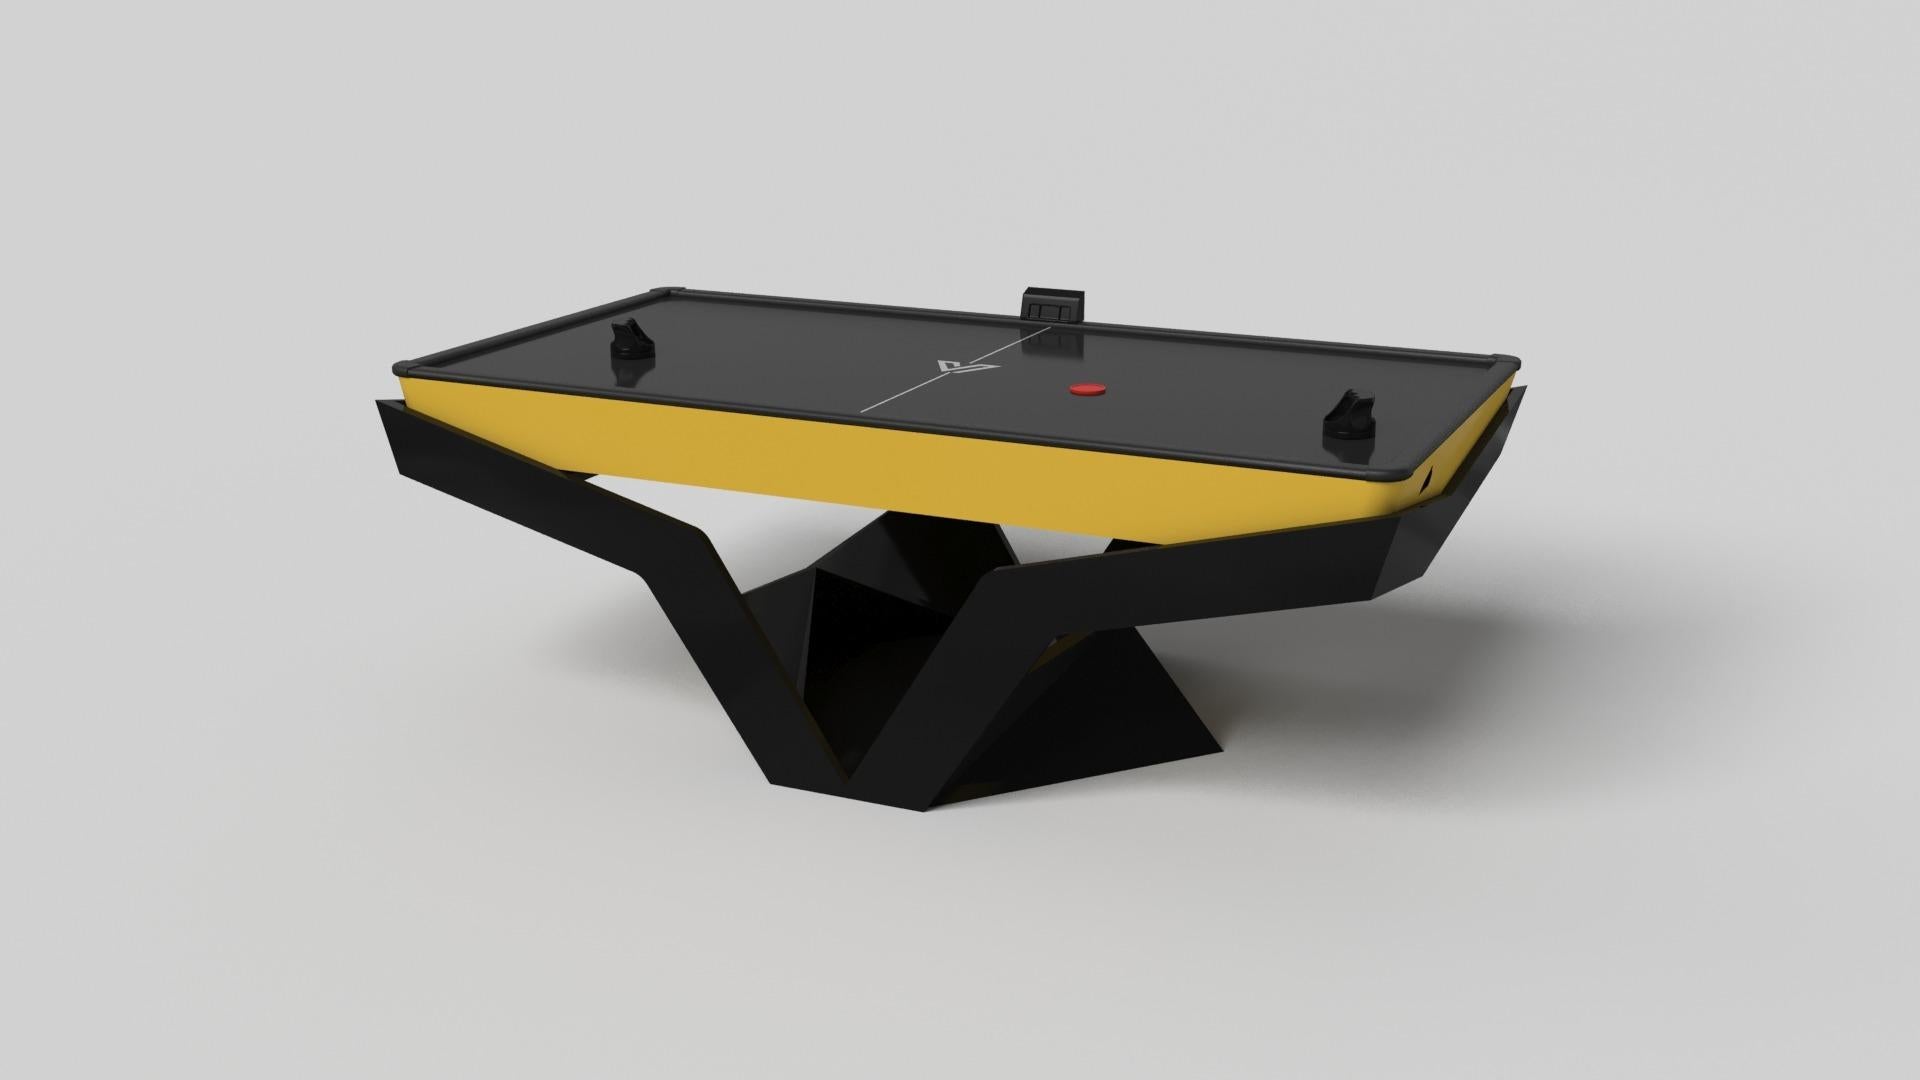 The Enzo air hockey table is Inspired by the aerodynamic angles of top-of-the-line European vehicles. Designed with sleek, V-shaped lines and a thoughtful use of negative space, this table boasts an energetic sense of spirit while epitomizing the